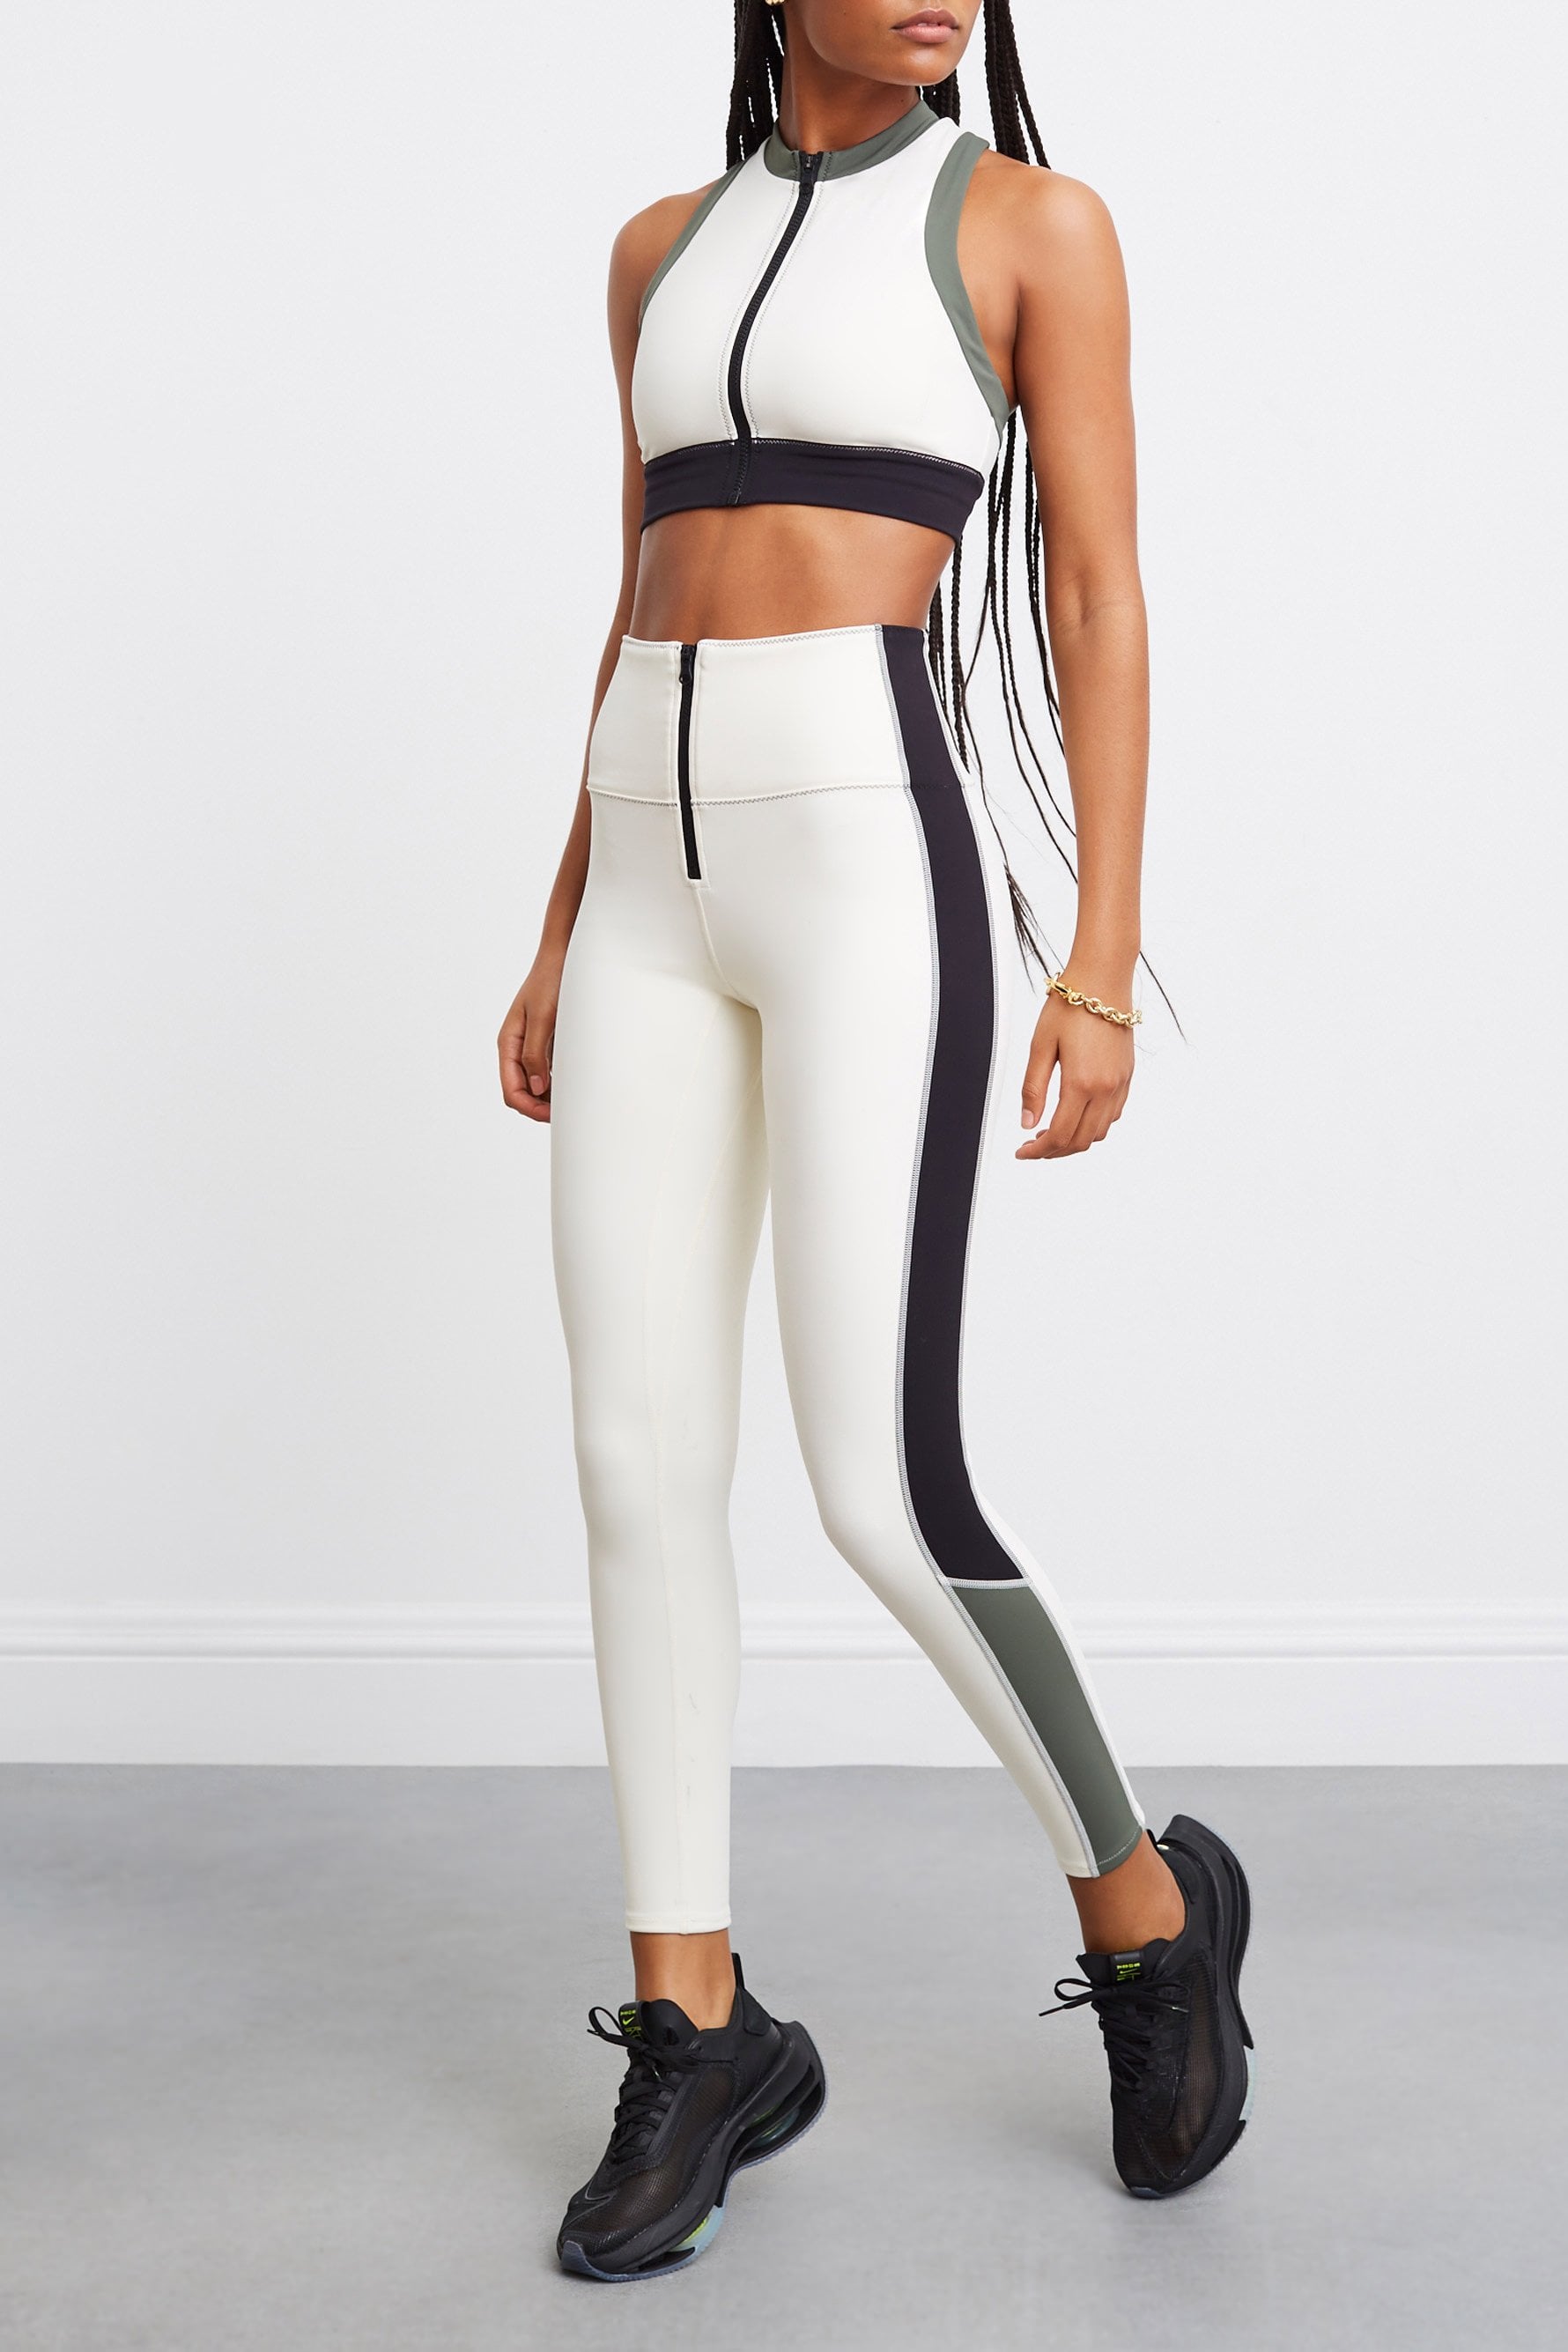 Bandier x Solid & Striped Soleil Zip Front Legging and Trek High Neck Bra, Bandier's New Collection With Solid & Striped Will Have You Dreaming of  Summer